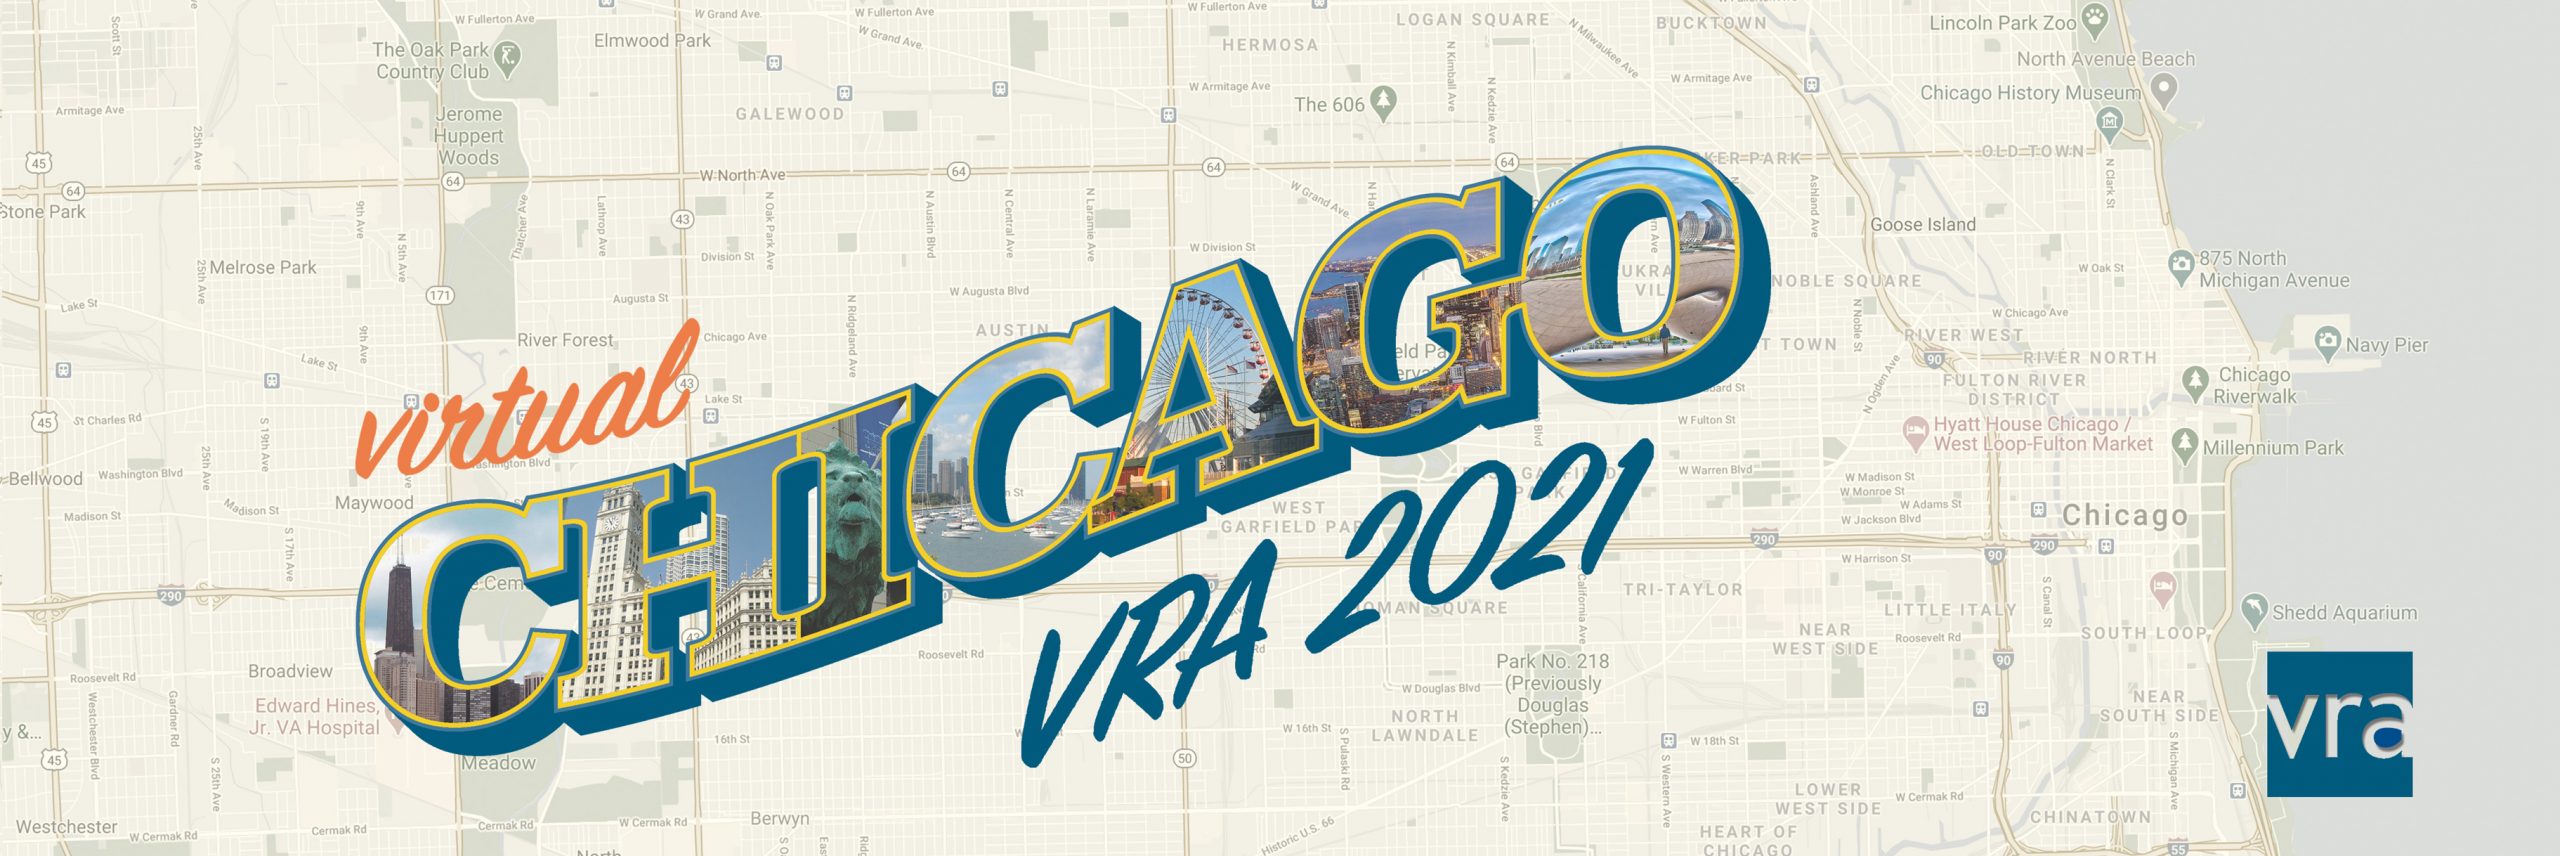 Chicago VRA 2021 over map of Chicago